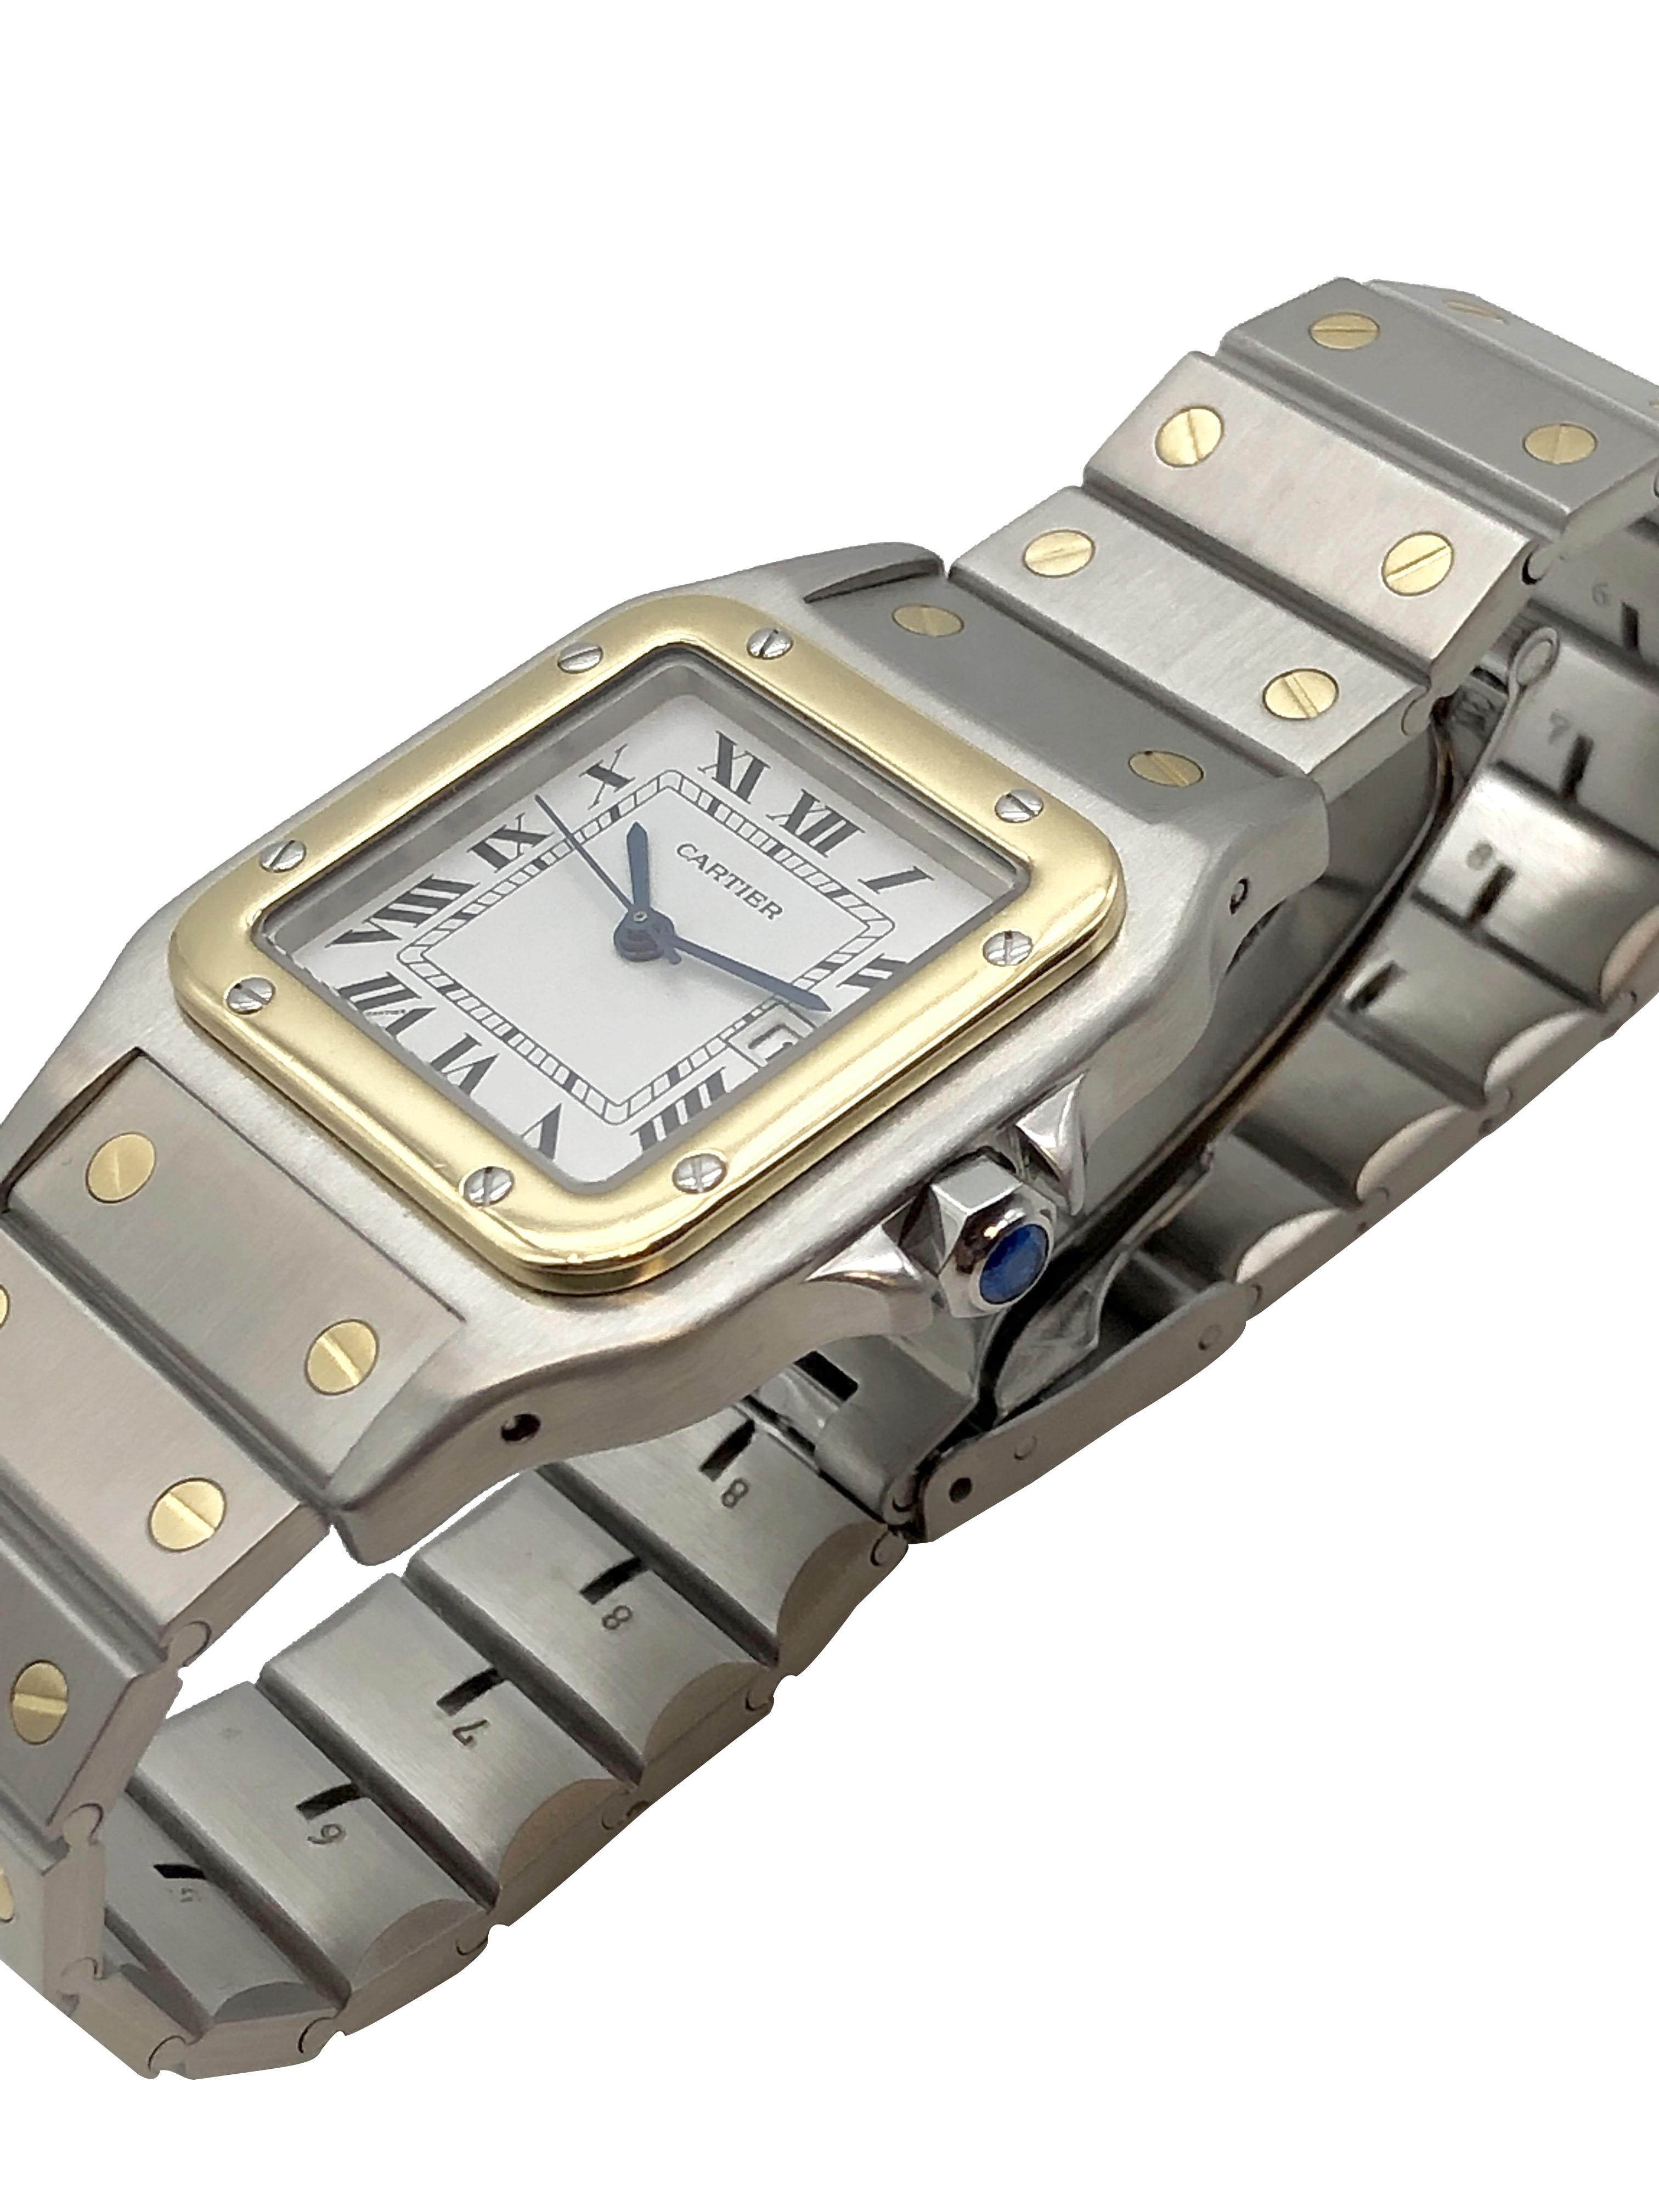 Circa 2000 Cartier Santos Galbee Wrist Watch 41 M.M. ( lug end to end ) X 29 M.M Stainless Steel case with 18K Yellow Gold Bezel and a Sapphire Crown, Quartz Movement, White Dial with Black Roman Numerals a Calendar window at the 3 position and a